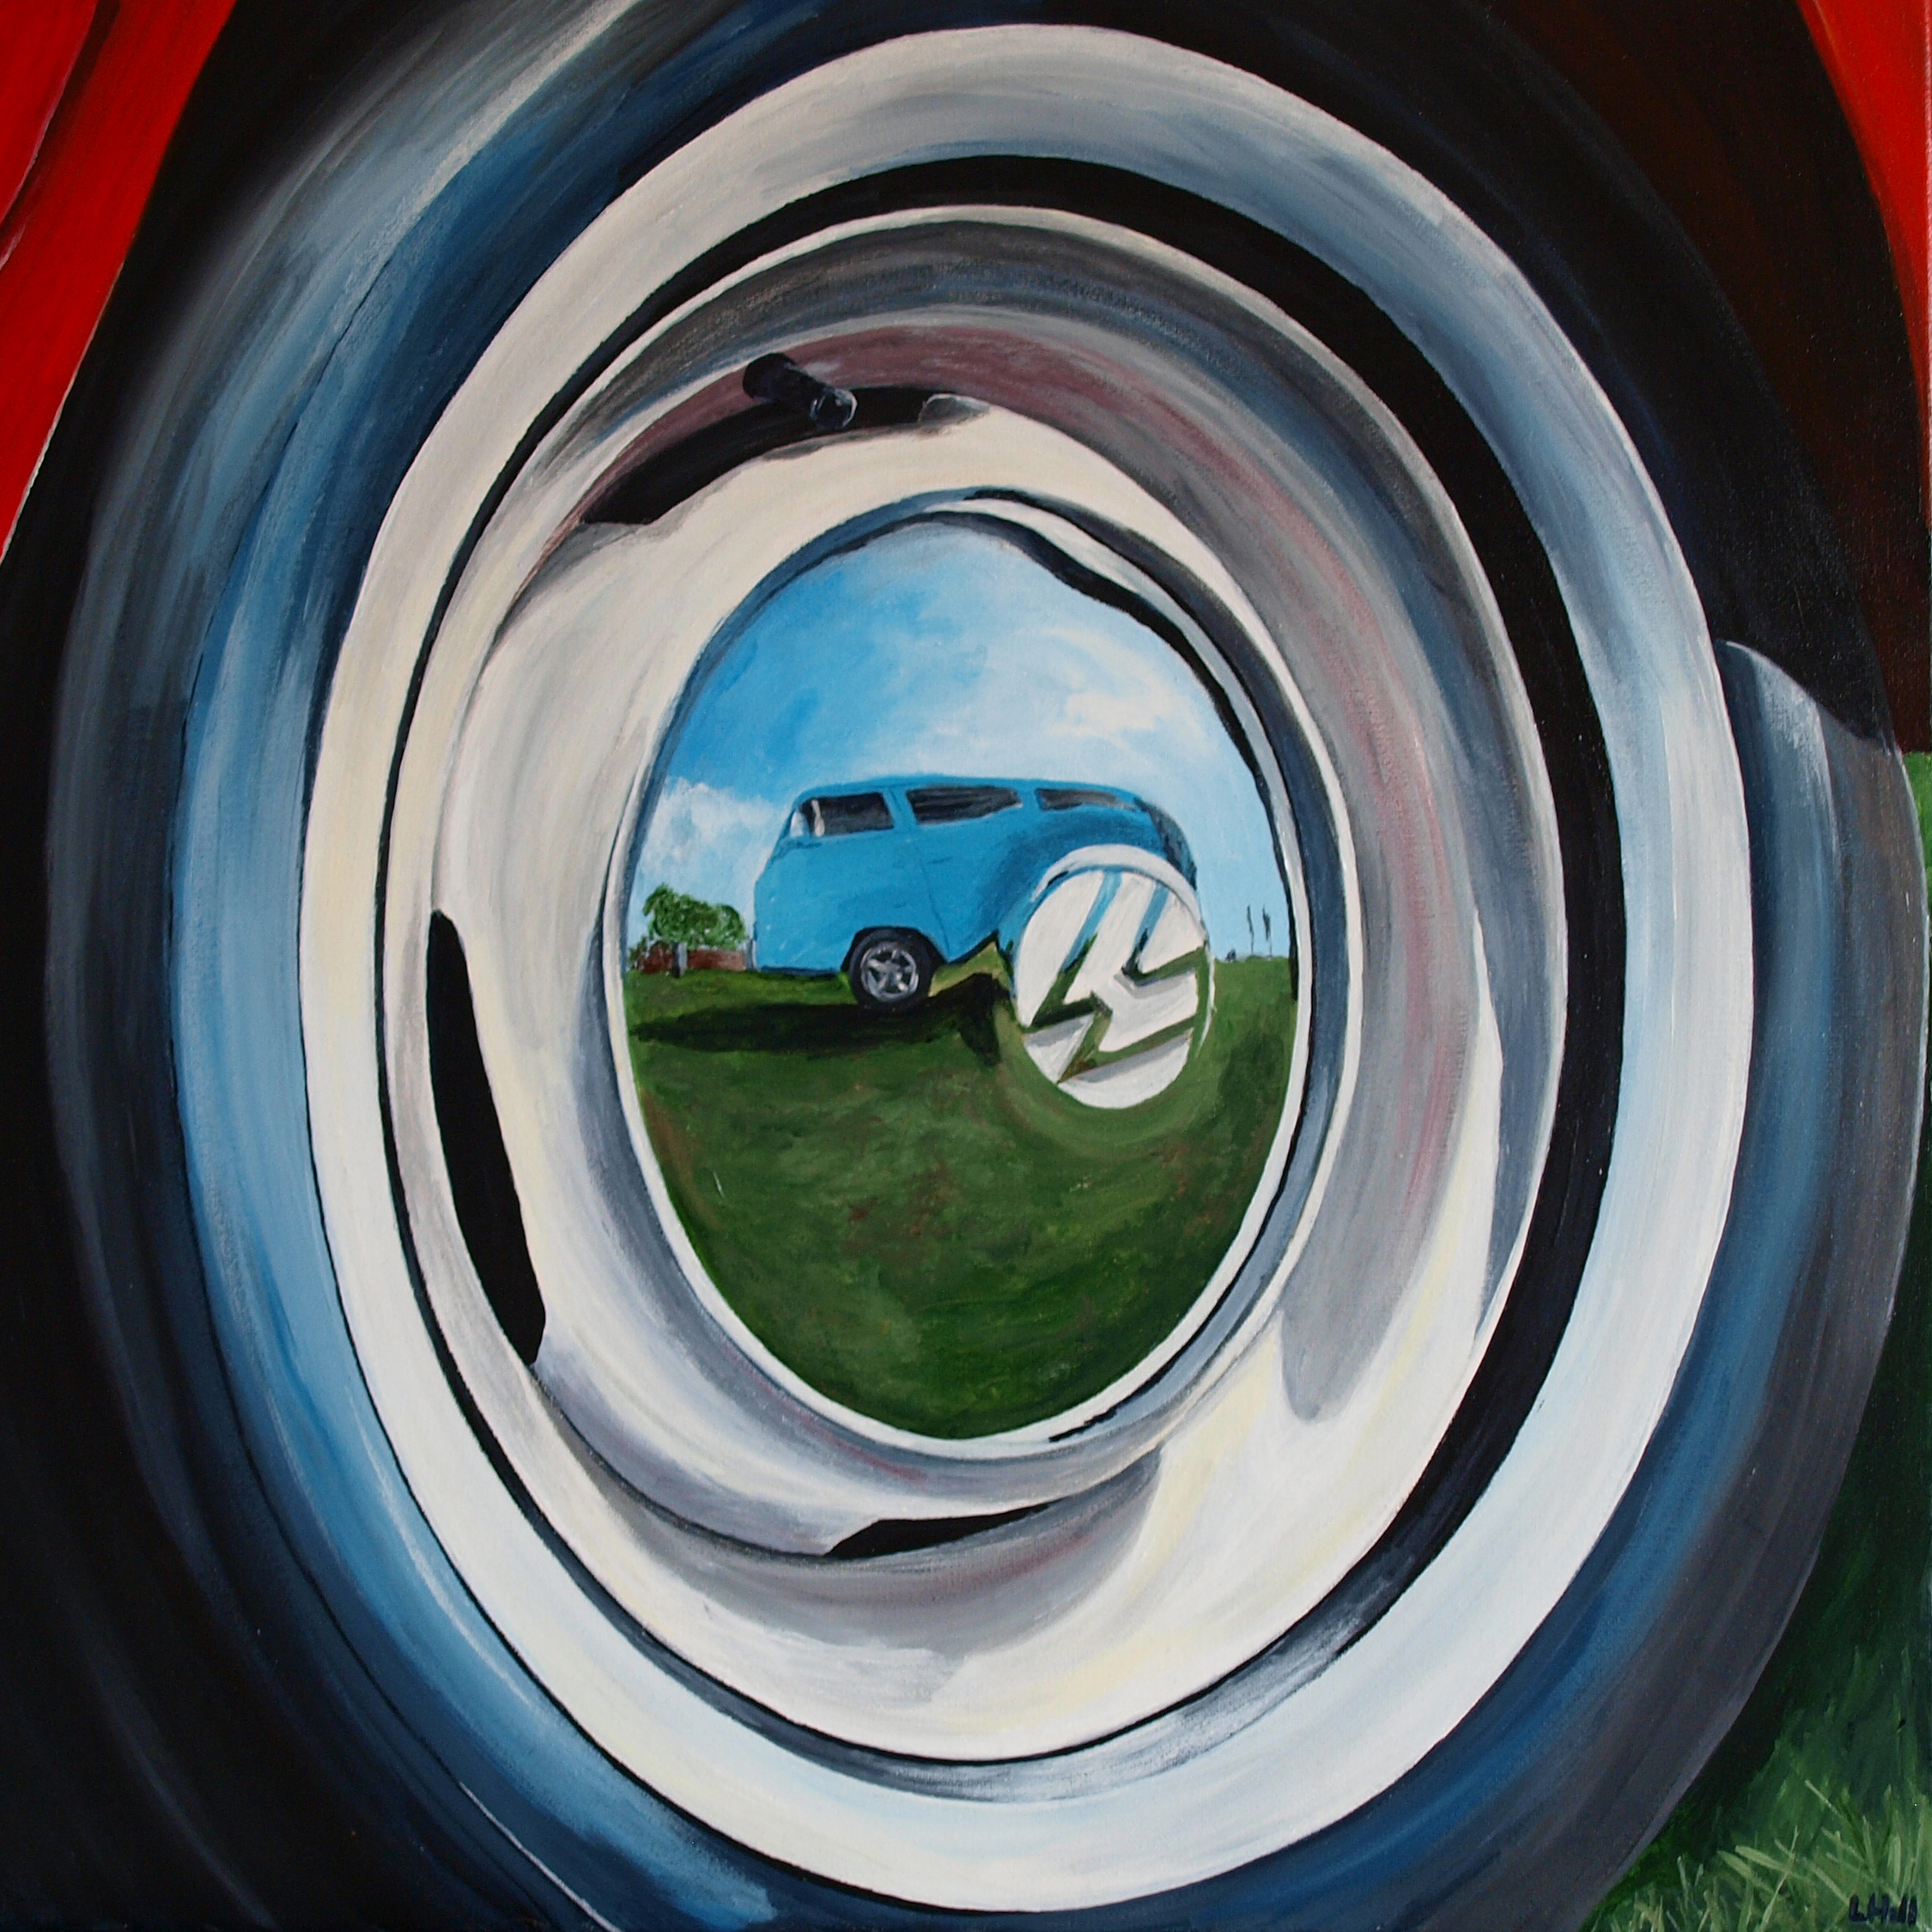 Reflection of a Campervan acrylic painting by Louisa Hill